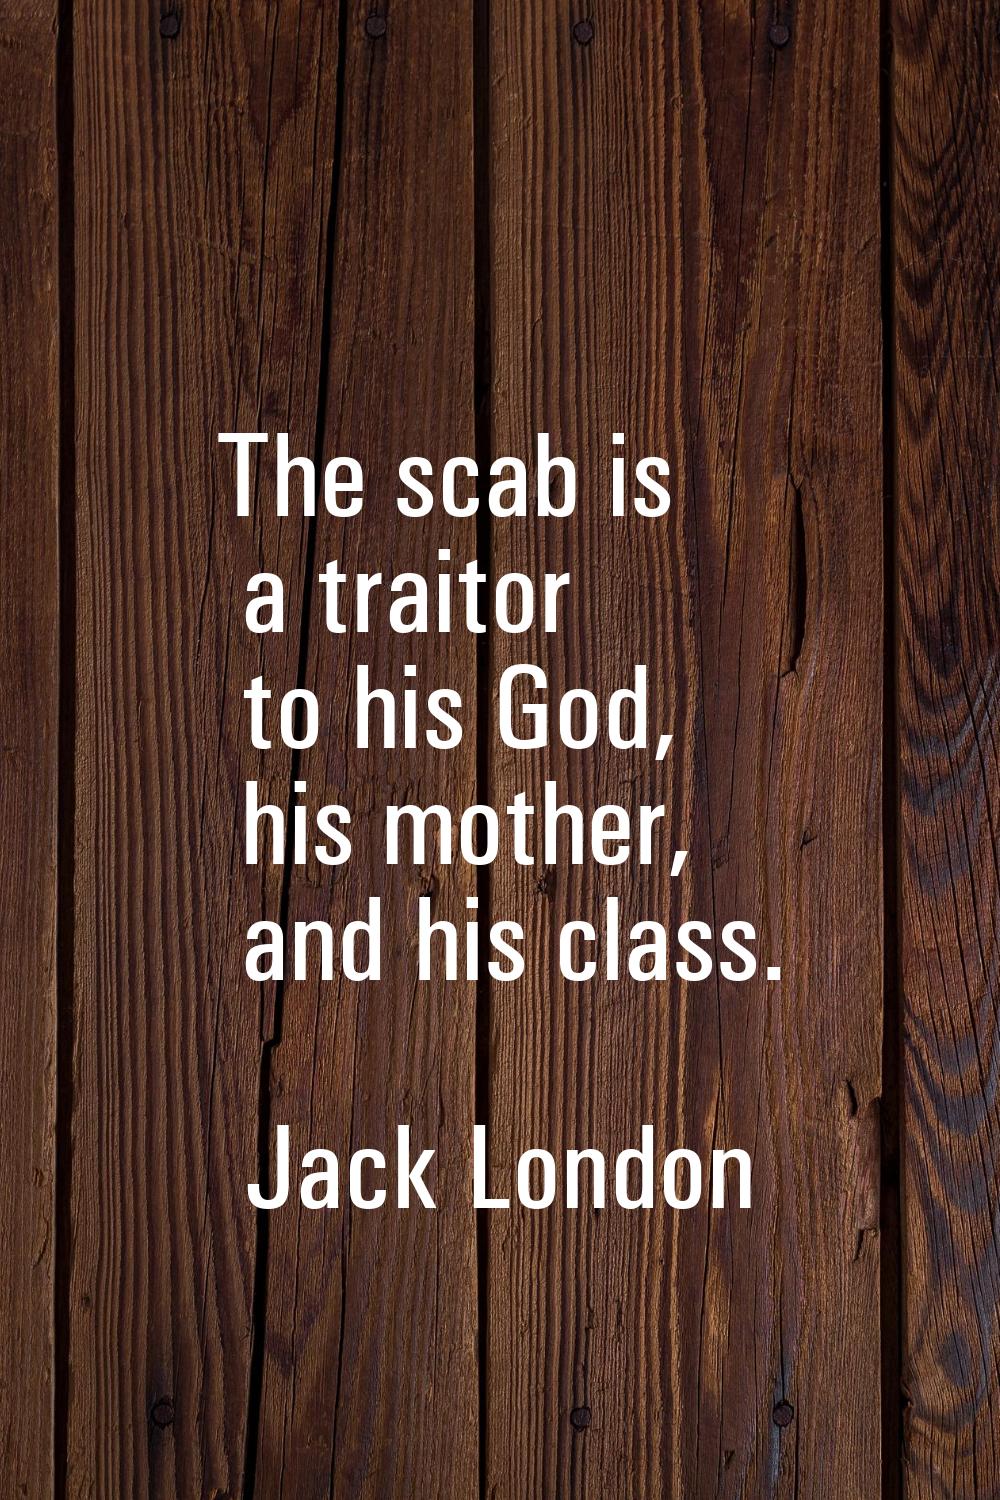 The scab is a traitor to his God, his mother, and his class.